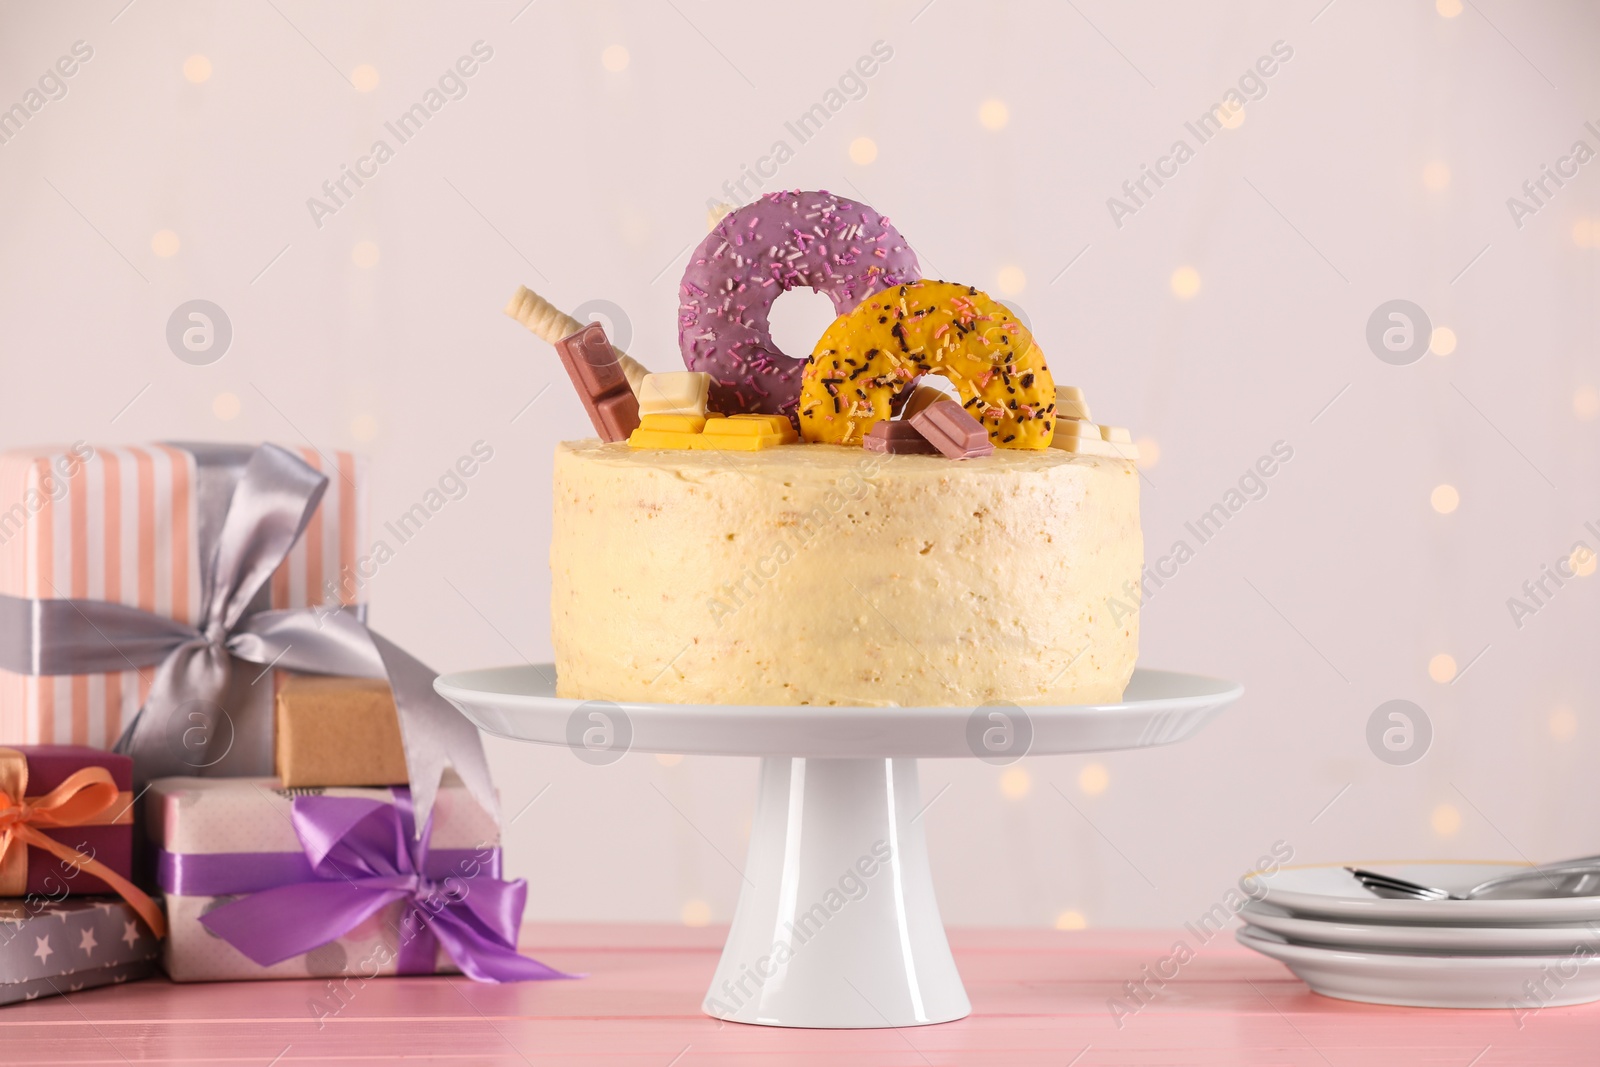 Photo of Delicious cake decorated with sweets, gift boxes, saucers and spoons on pink wooden table